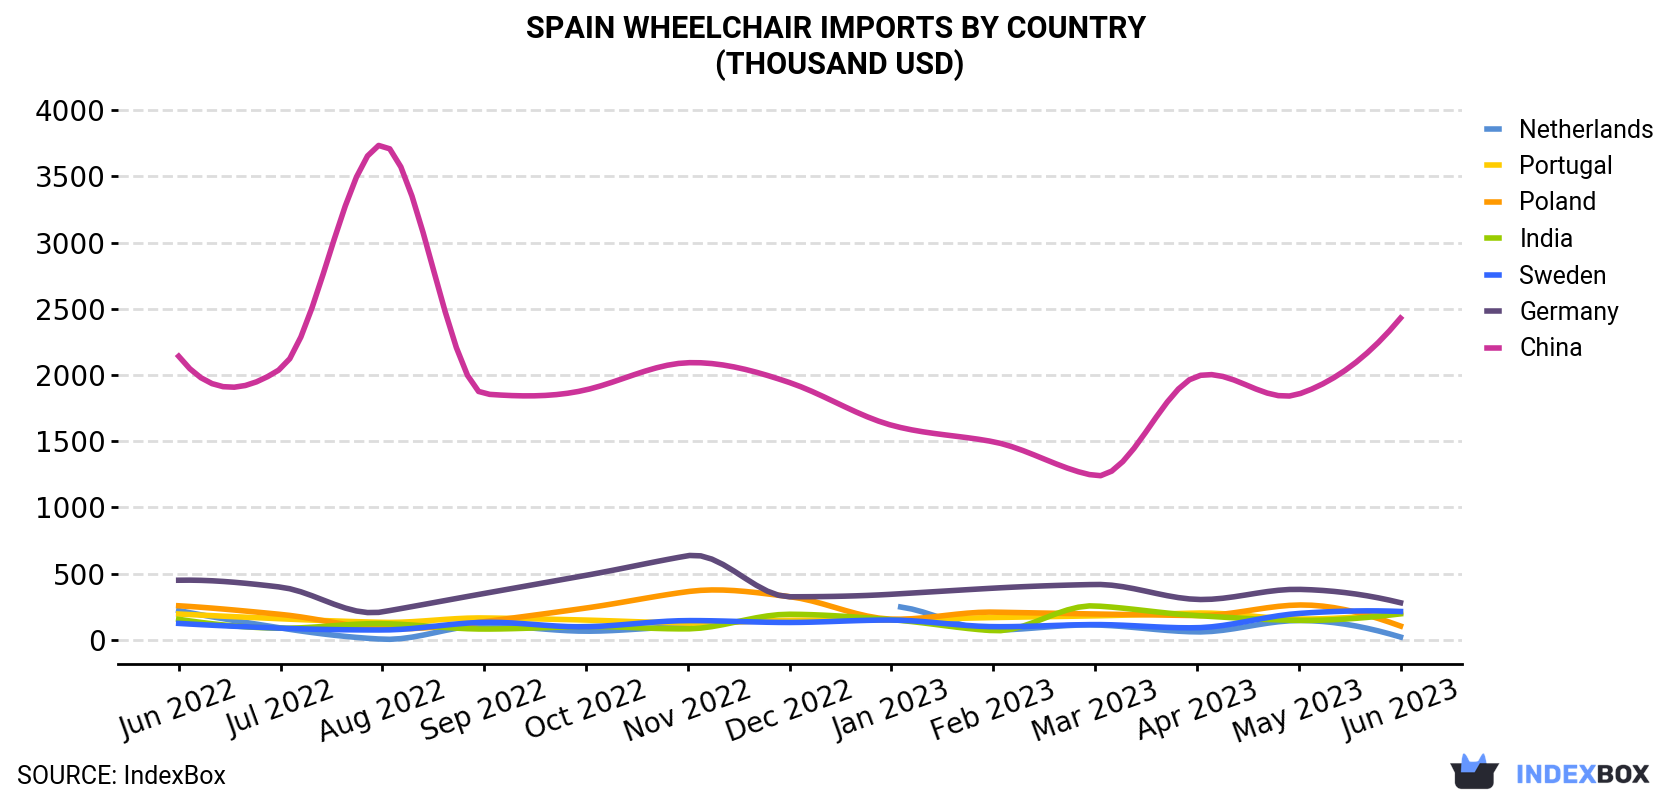 Spain Wheelchair Imports By Country (Thousand USD)